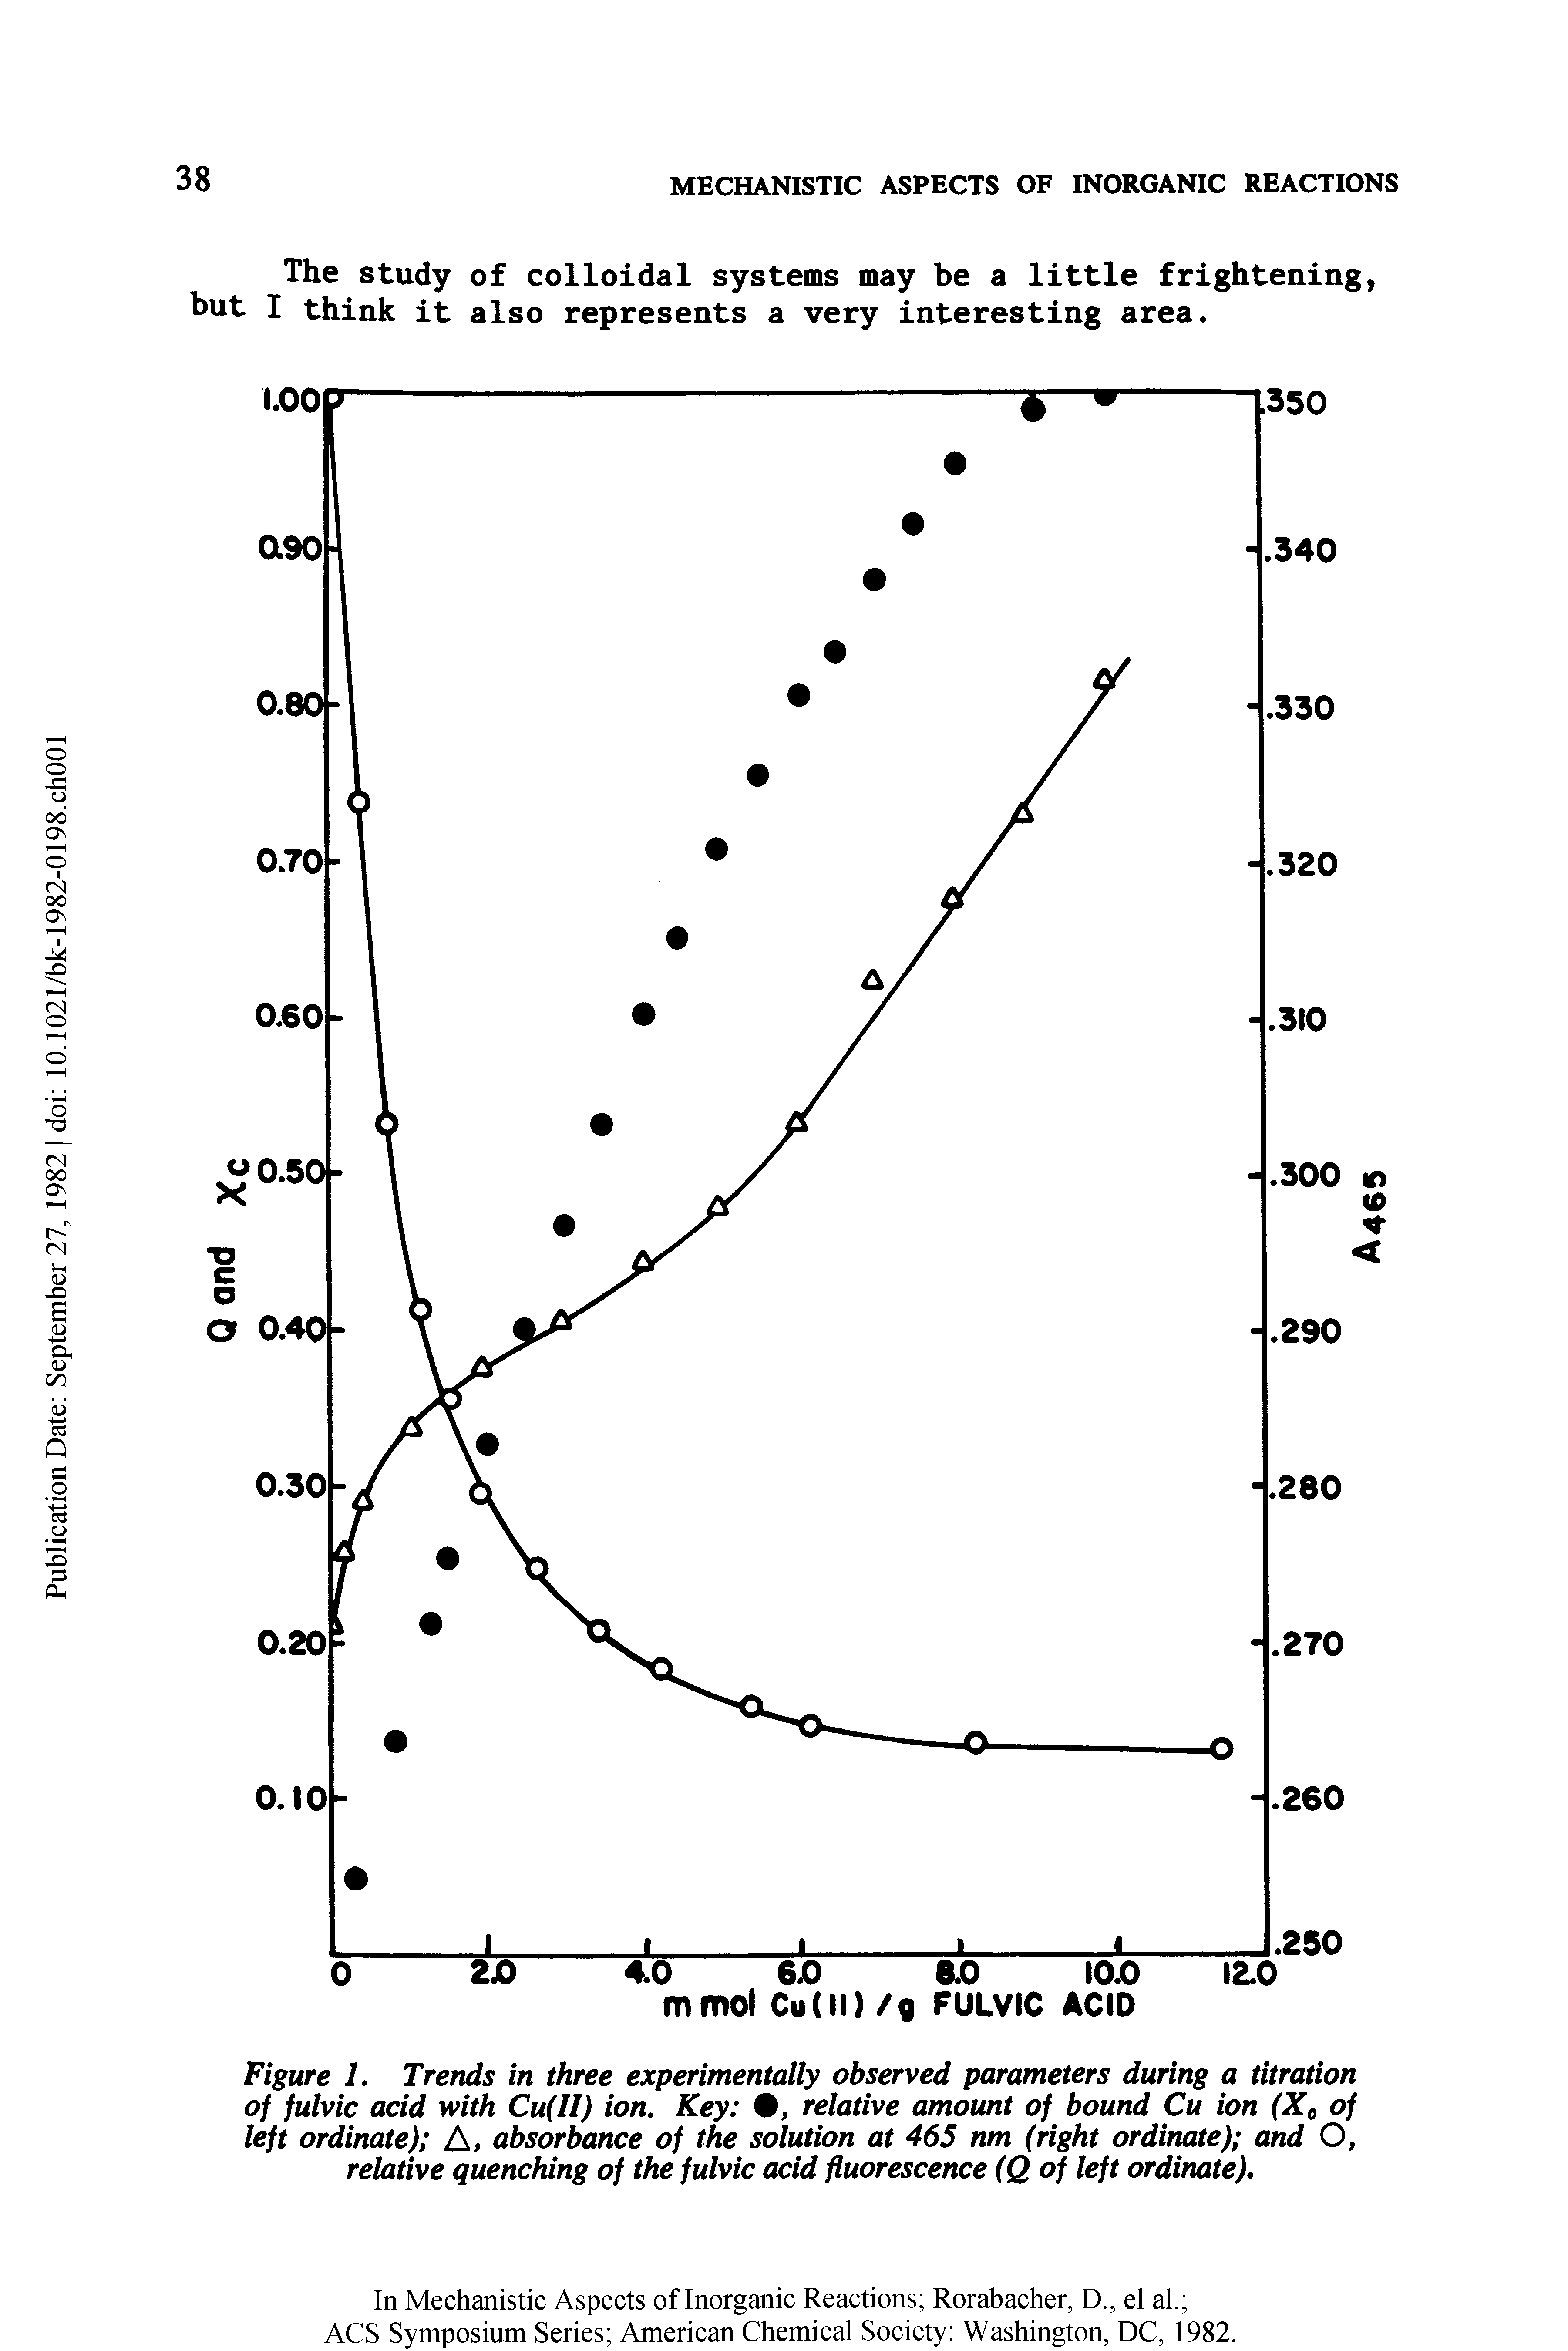 Figure 1. Trends in three experimentally observed parameters during a titration of fulvic acid with Cu(II) ion. Key , relative amount of bound Cu ion (Xc of left ordinate) A, absorbance of the solution at 465 nm (right ordinate) and O, relative quenching of the fulvic acid fluorescence (Q of left ordinate).